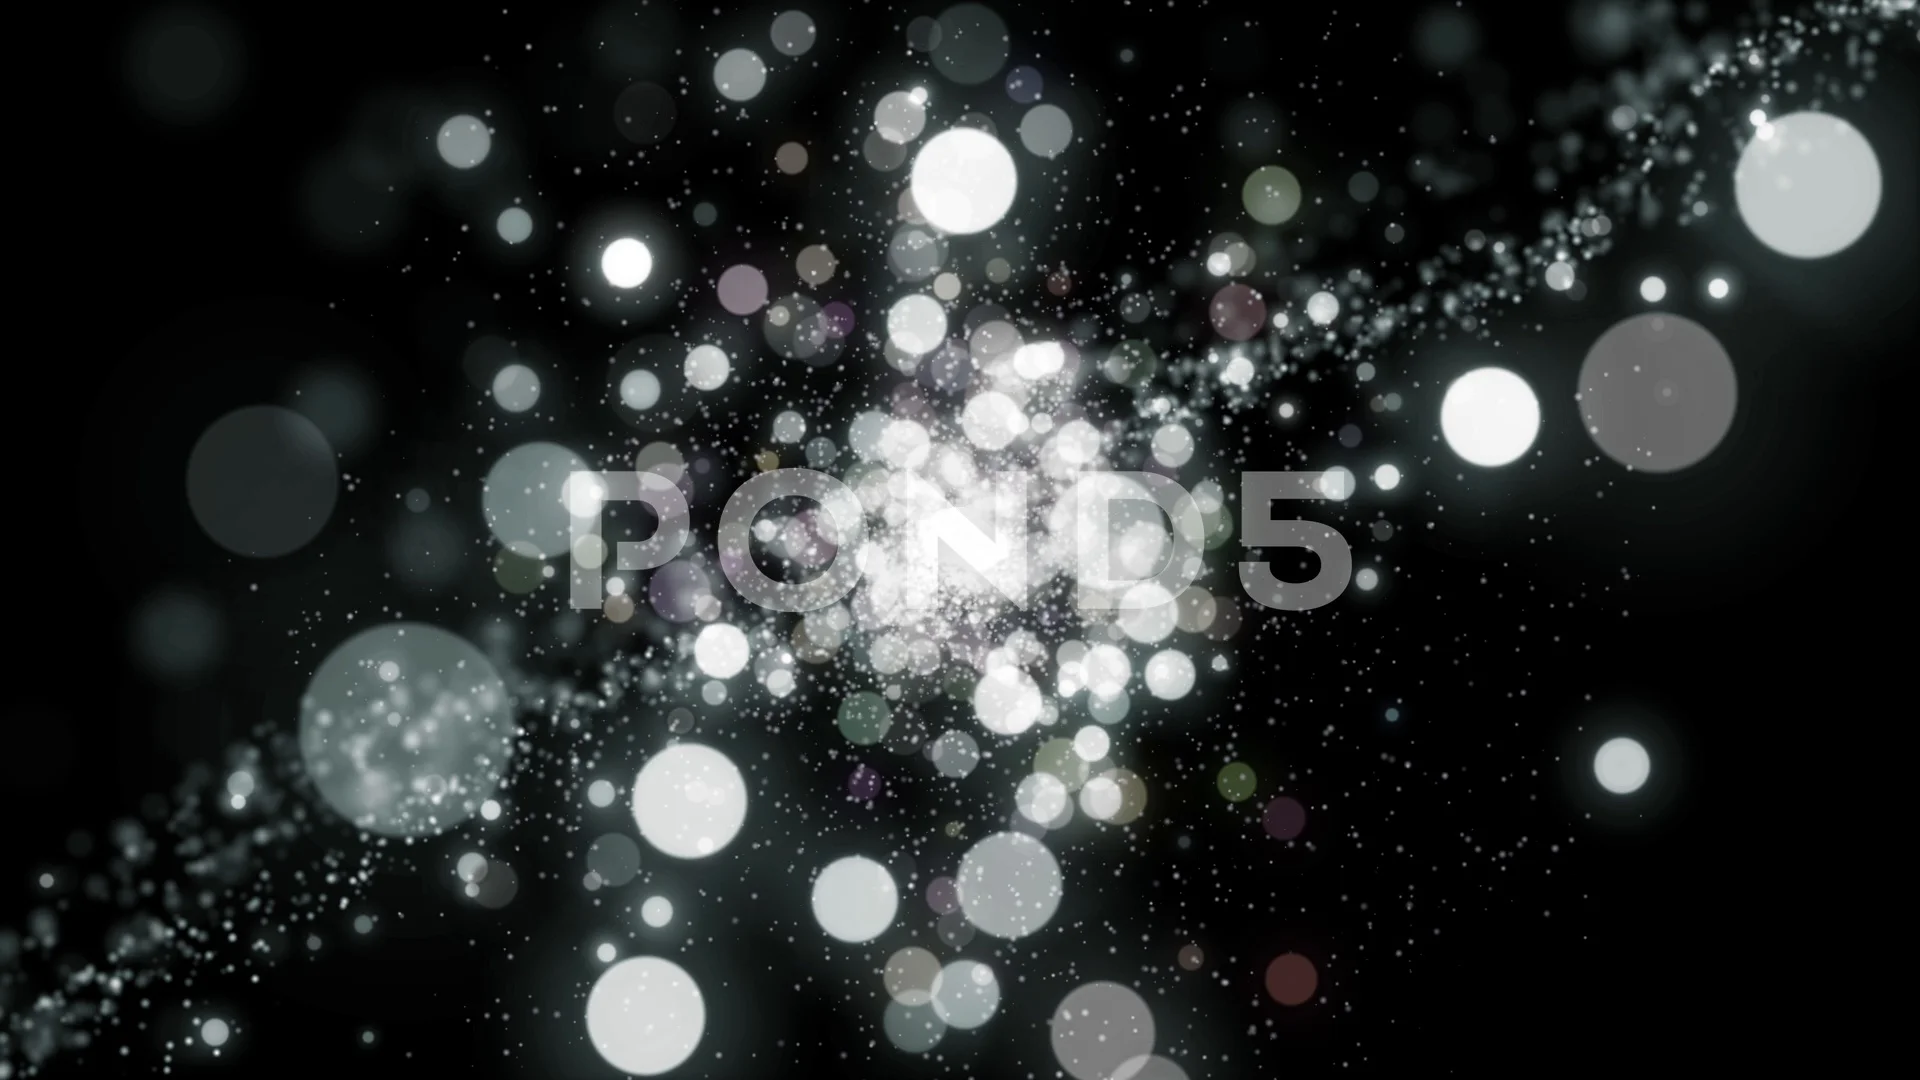 Lights white and black bokeh background.... | Stock Video | Pond5